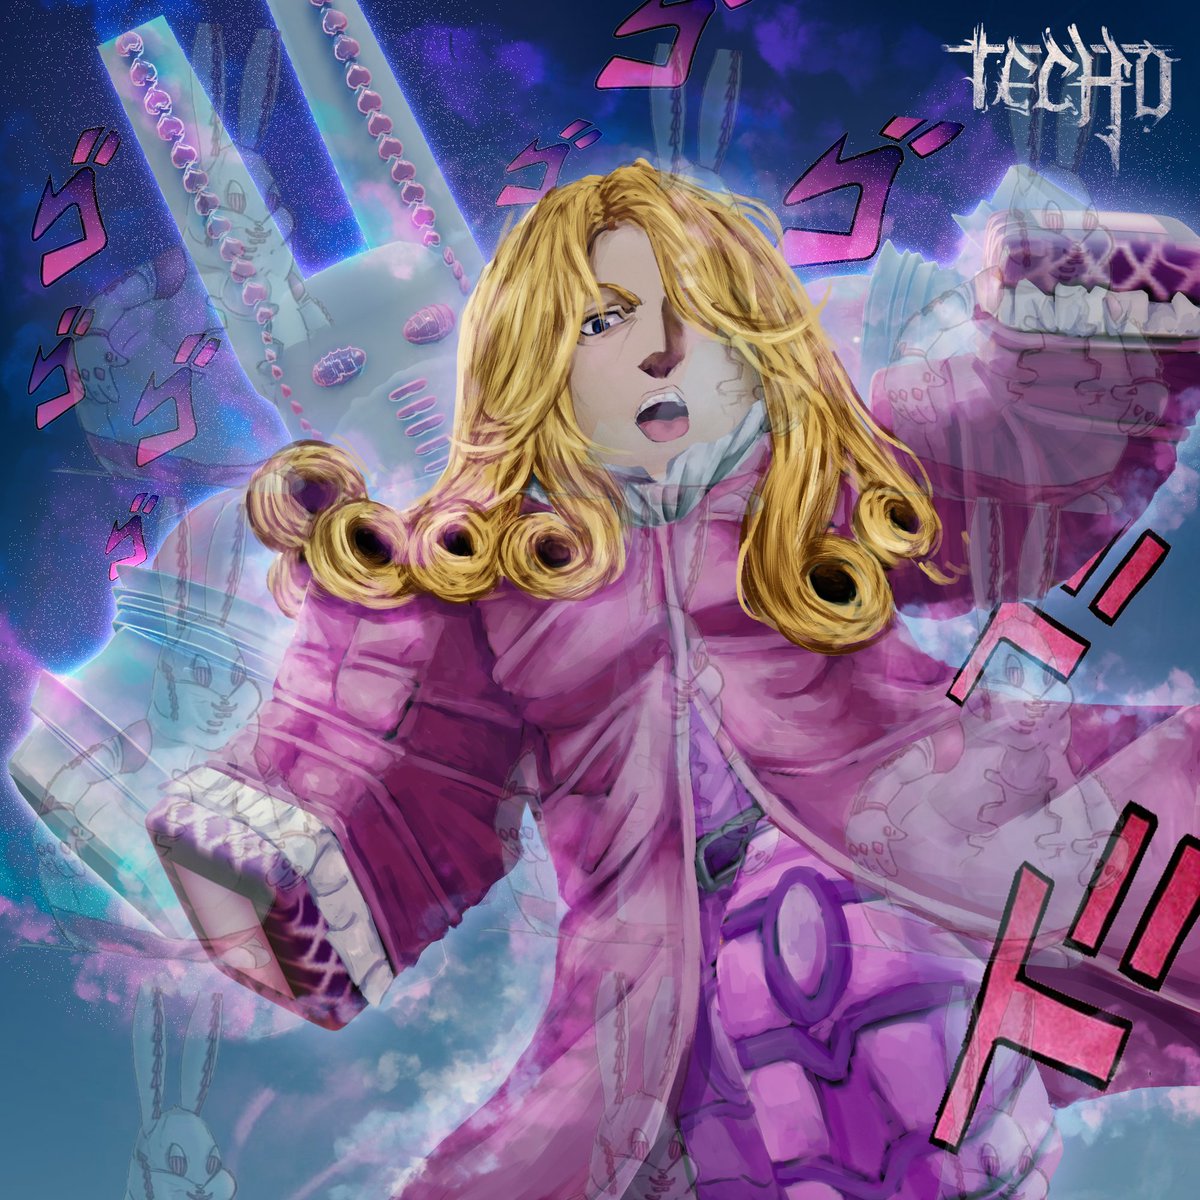 Techo On Twitter Funny Valentine Uwu Thanks To D4c Render From Reisirbx Roblox Robloxgfx Robloxgfxc Robloxdev Robloxart - roblox twitter uwu